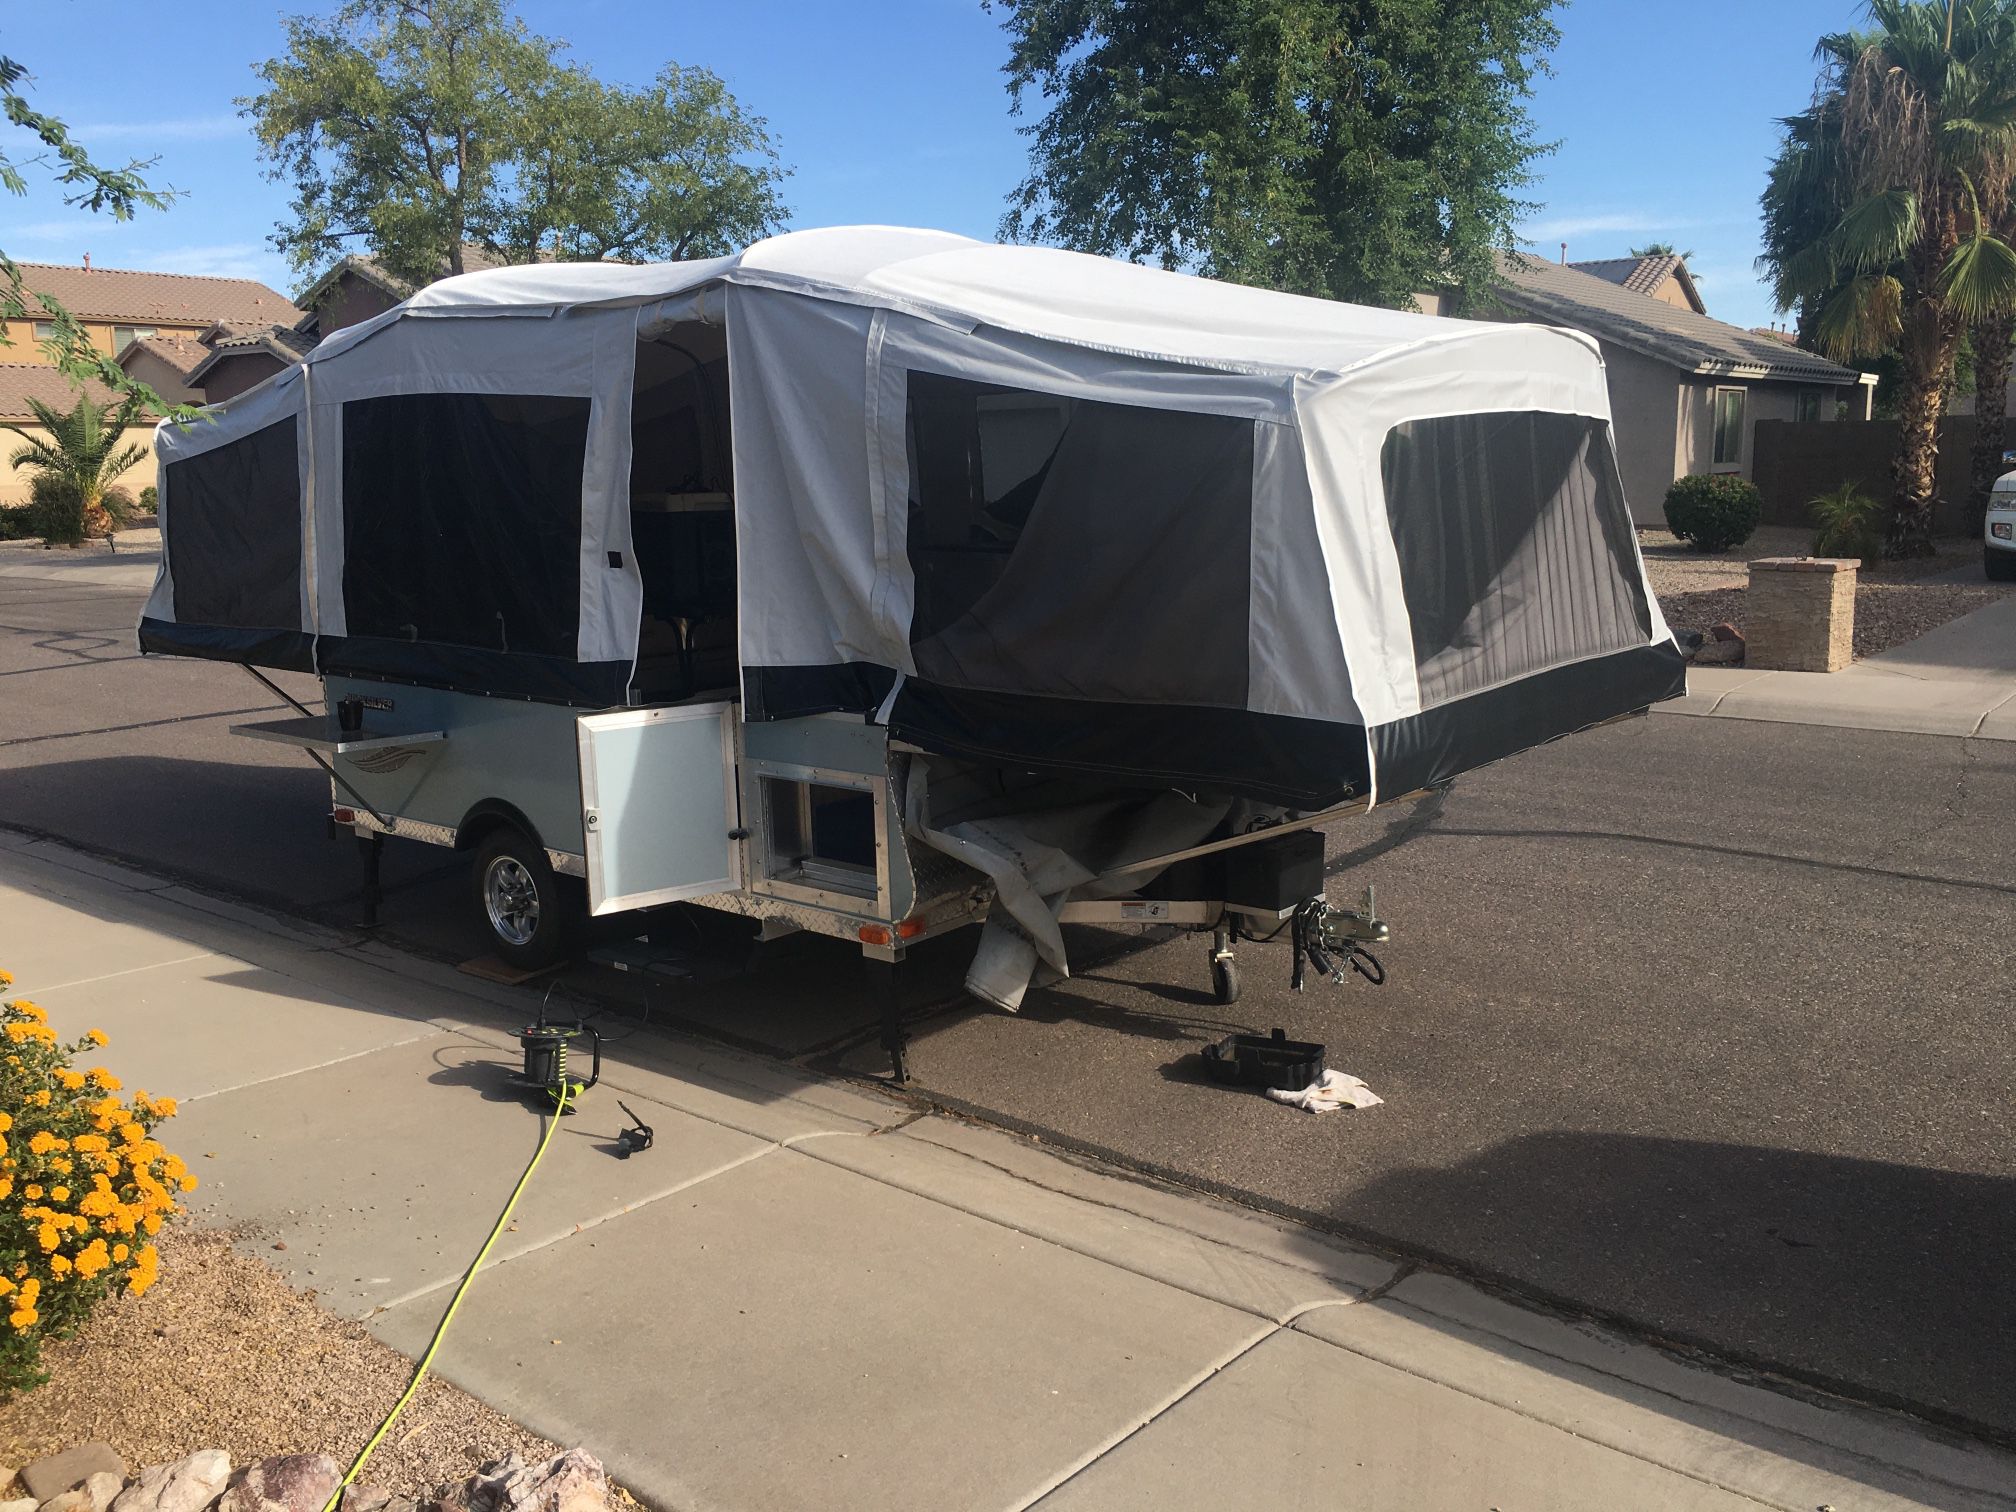 Livin Lite Quicksilver 10.0   Pop Up Camper 2015 All Aluminum   Electric Brakes  Can Pull With Most Cars  